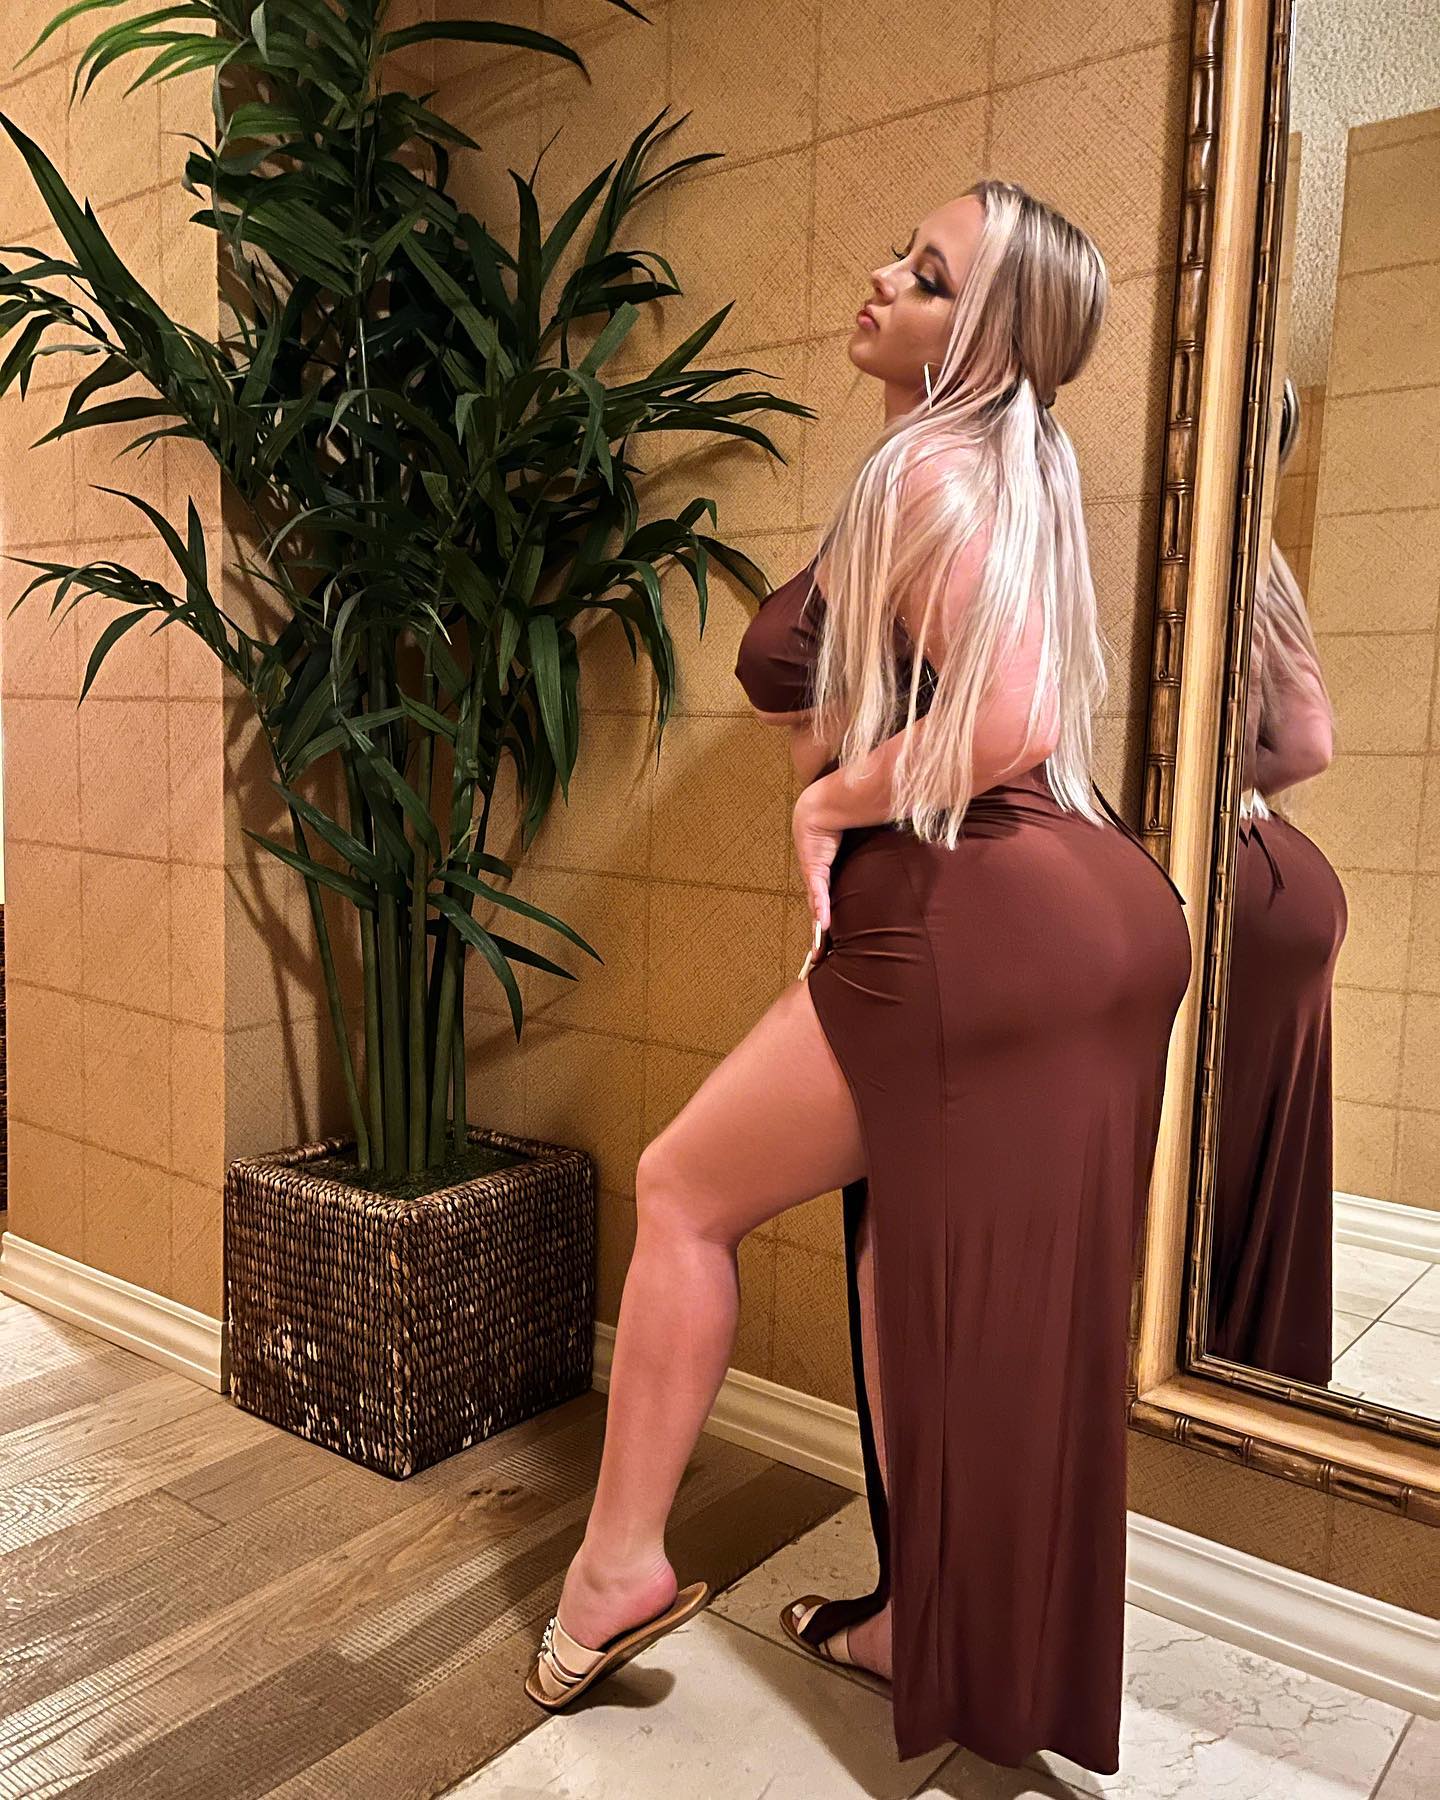 ana pucarevic recommends Hot Blonde Big Booty